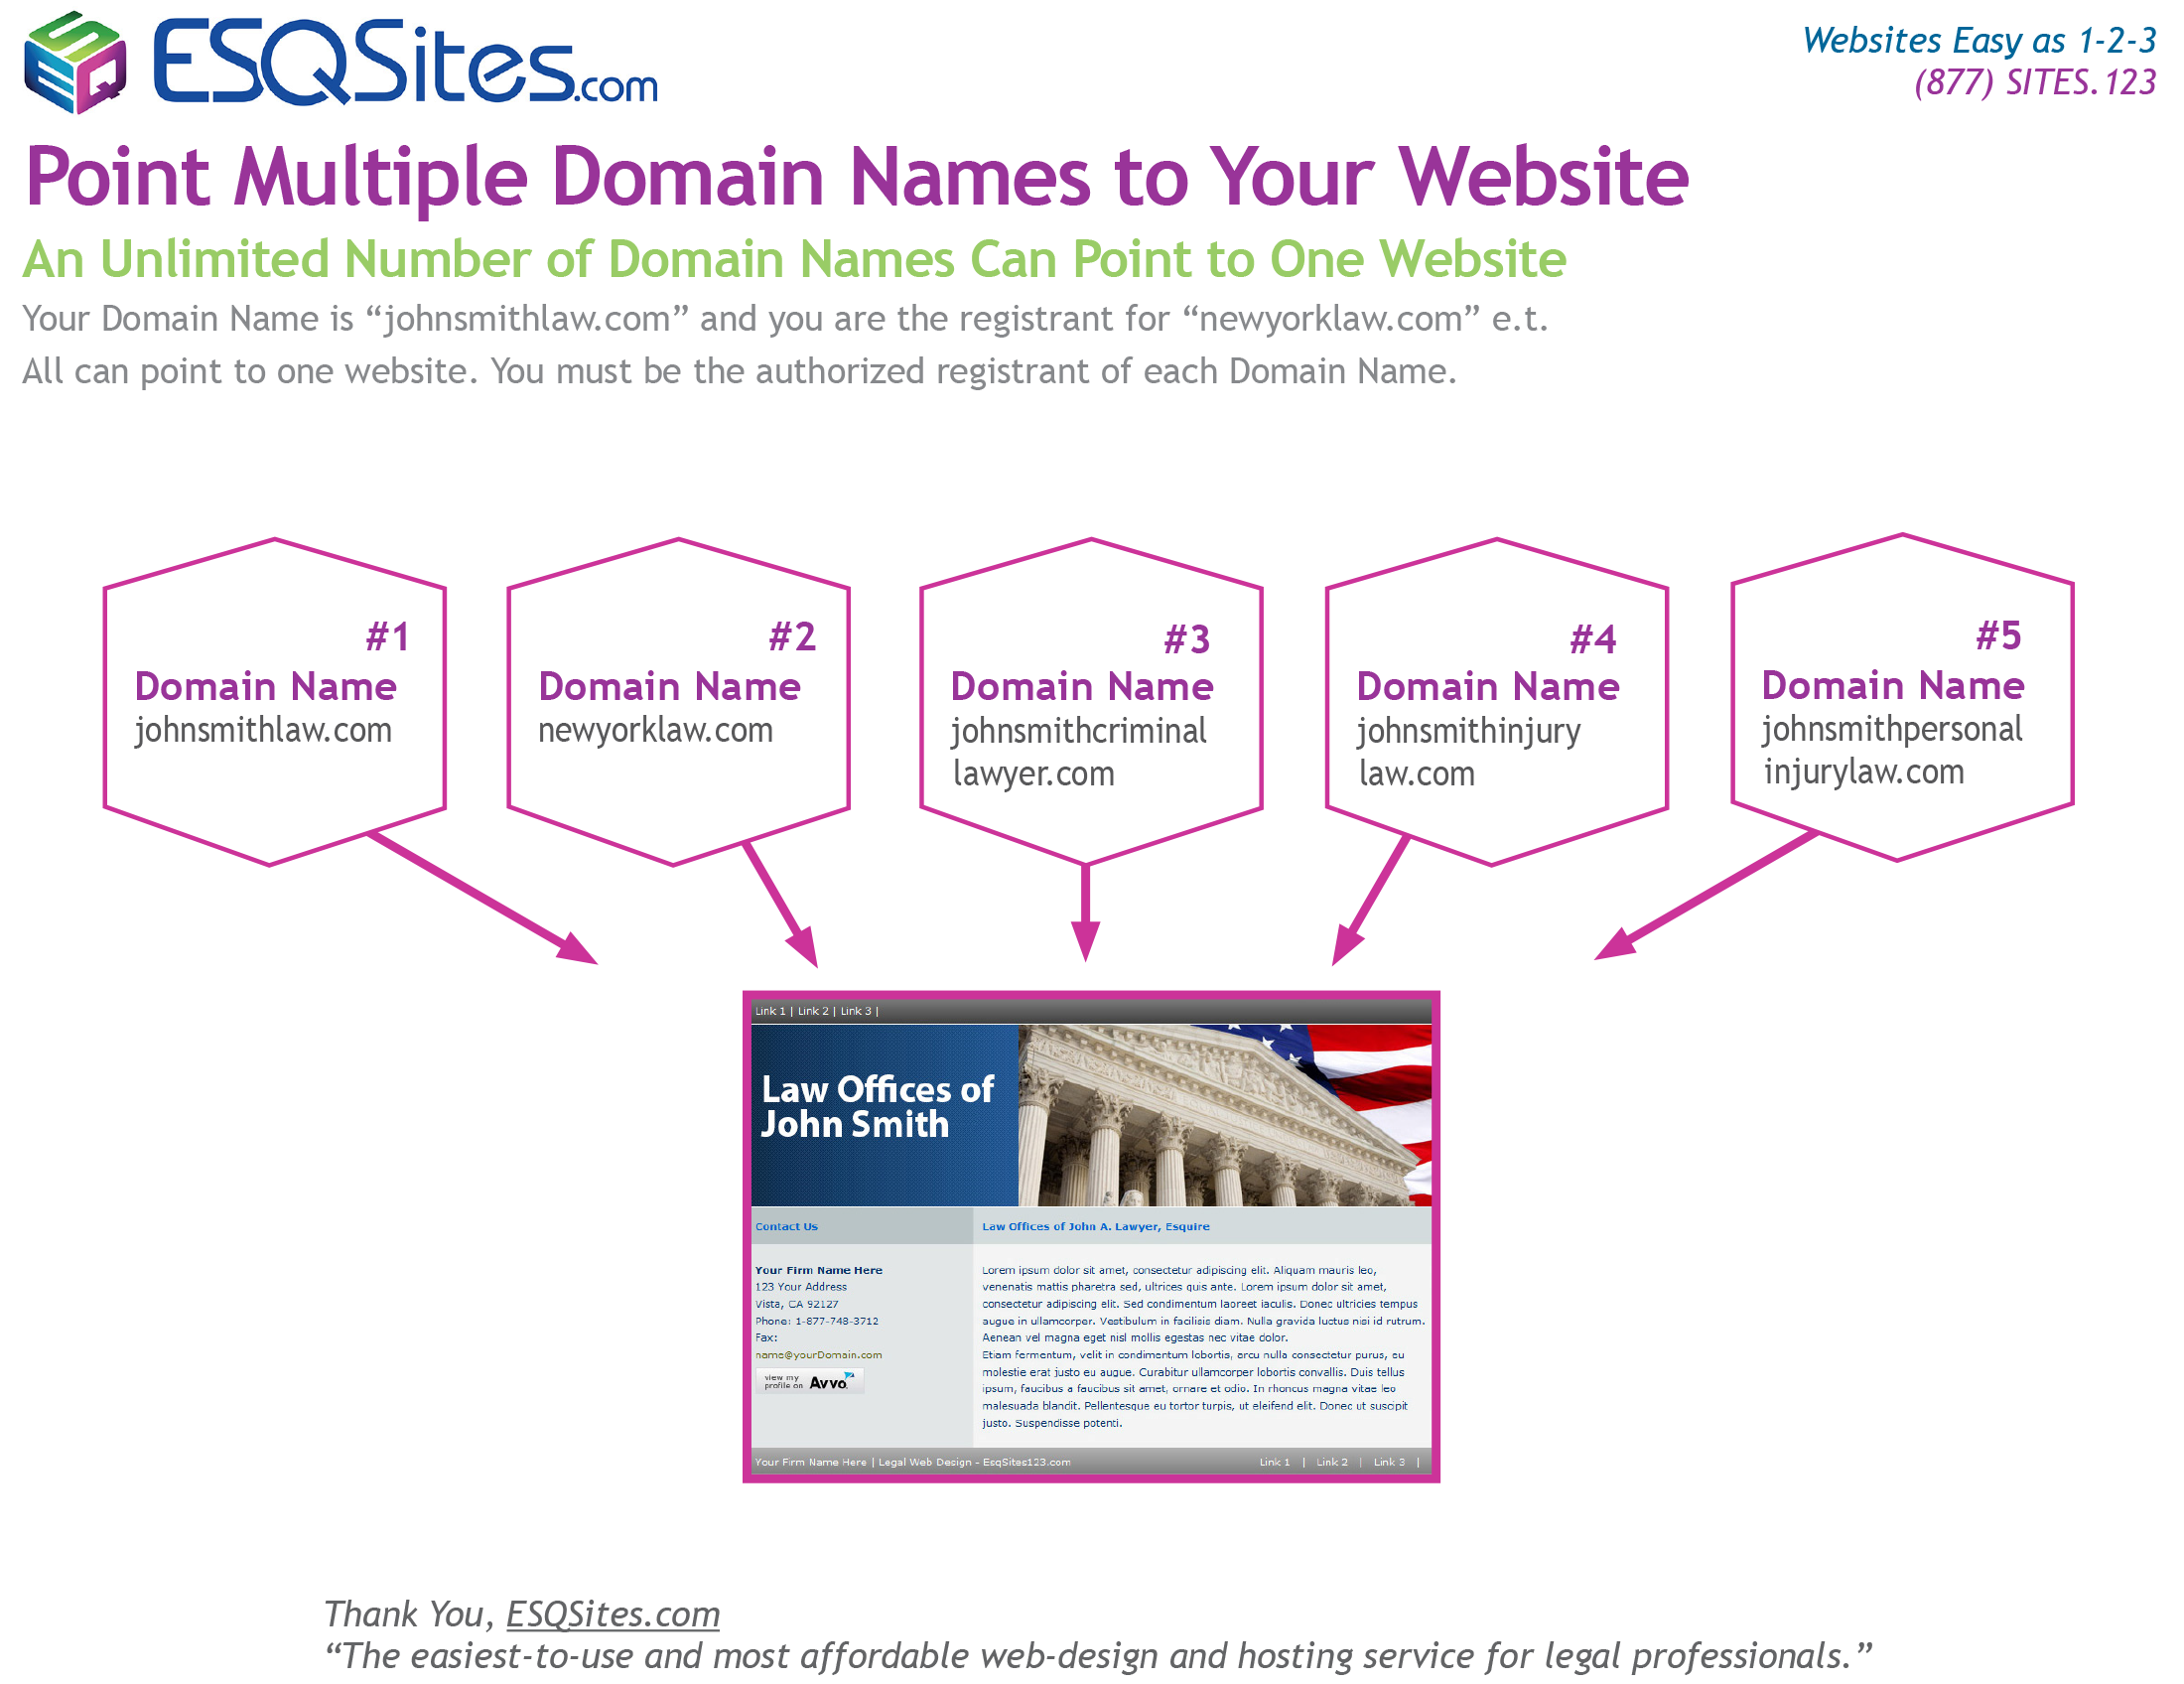 Multiple Domain Names Can Point to One Website